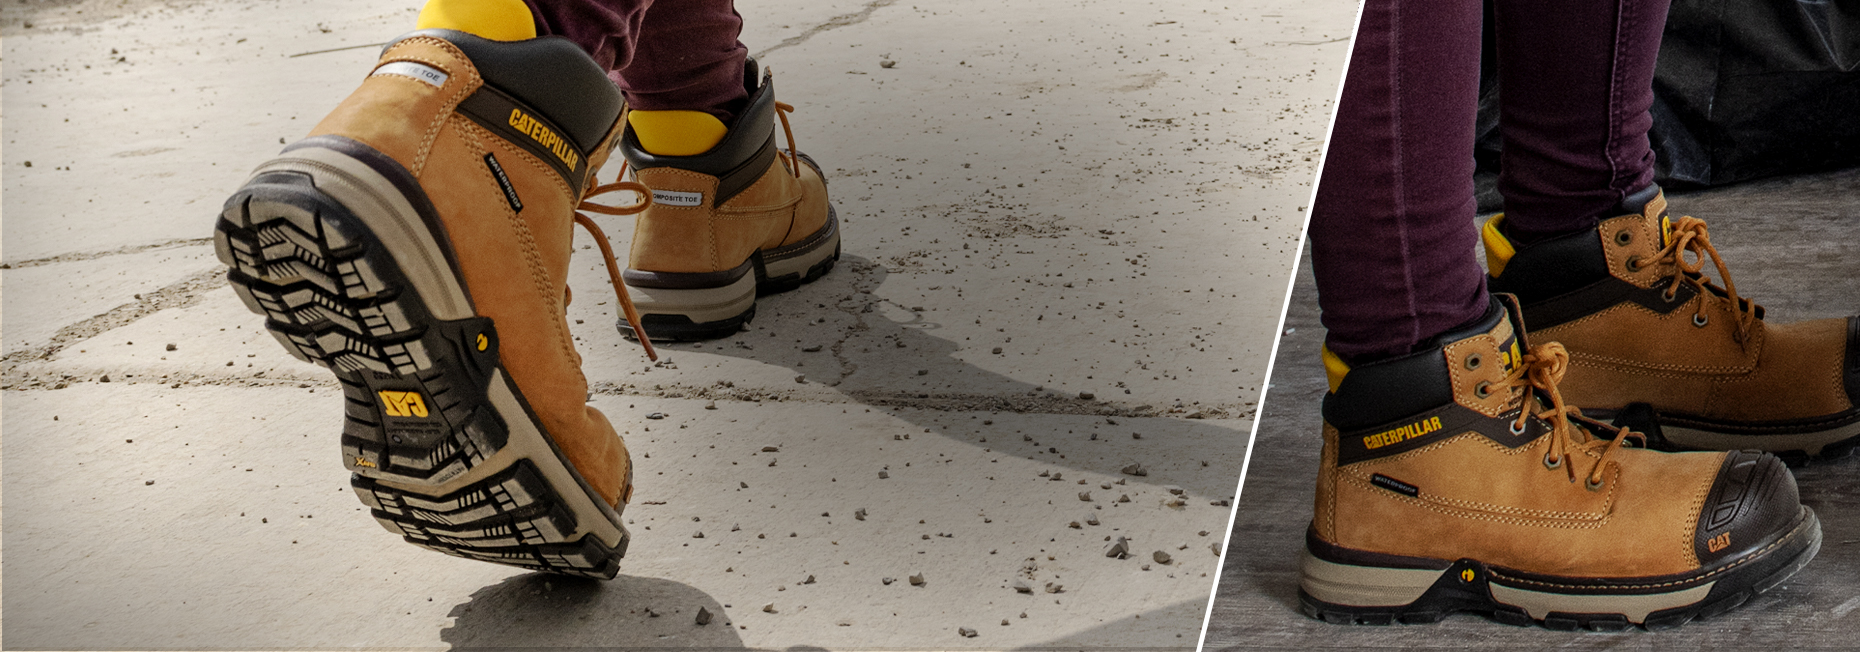 Rugged Boots For Women | Cat Footwear